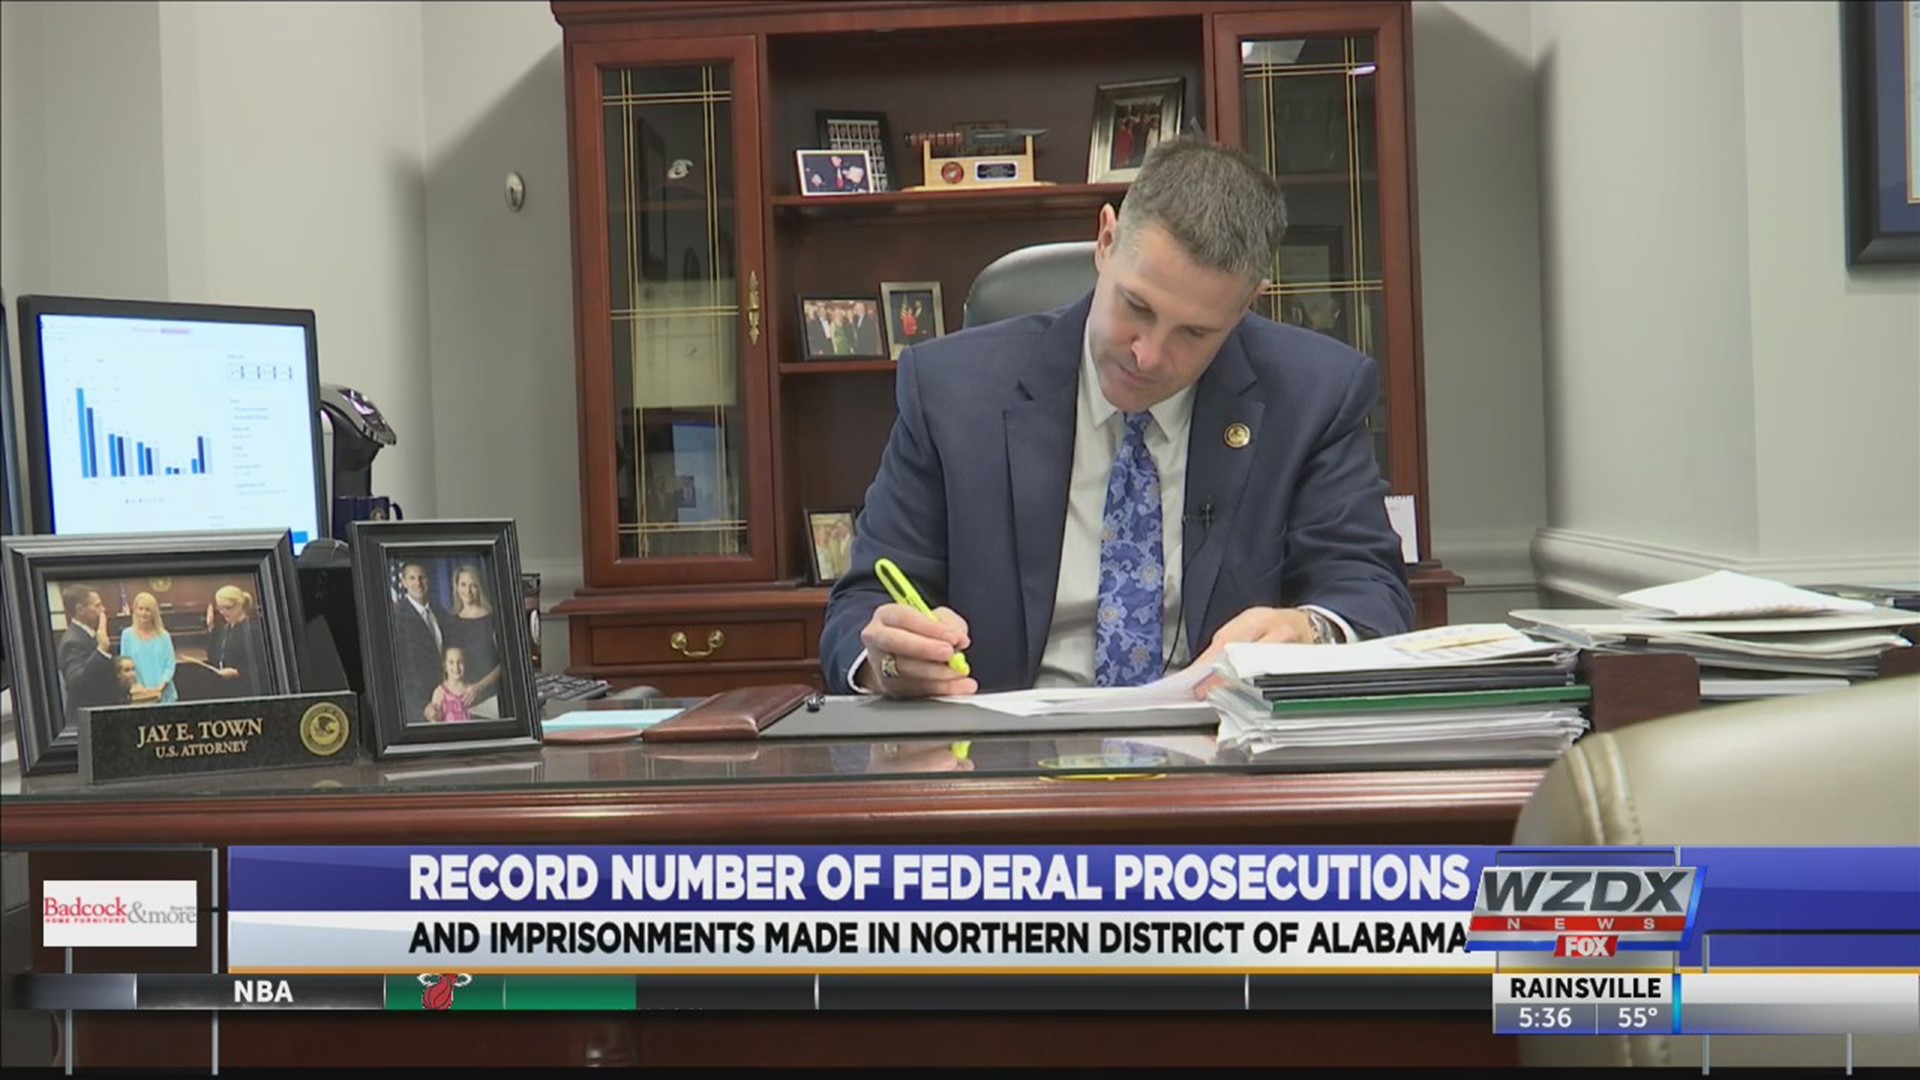 Record number of federal prosecutions in Northern District of Alabama